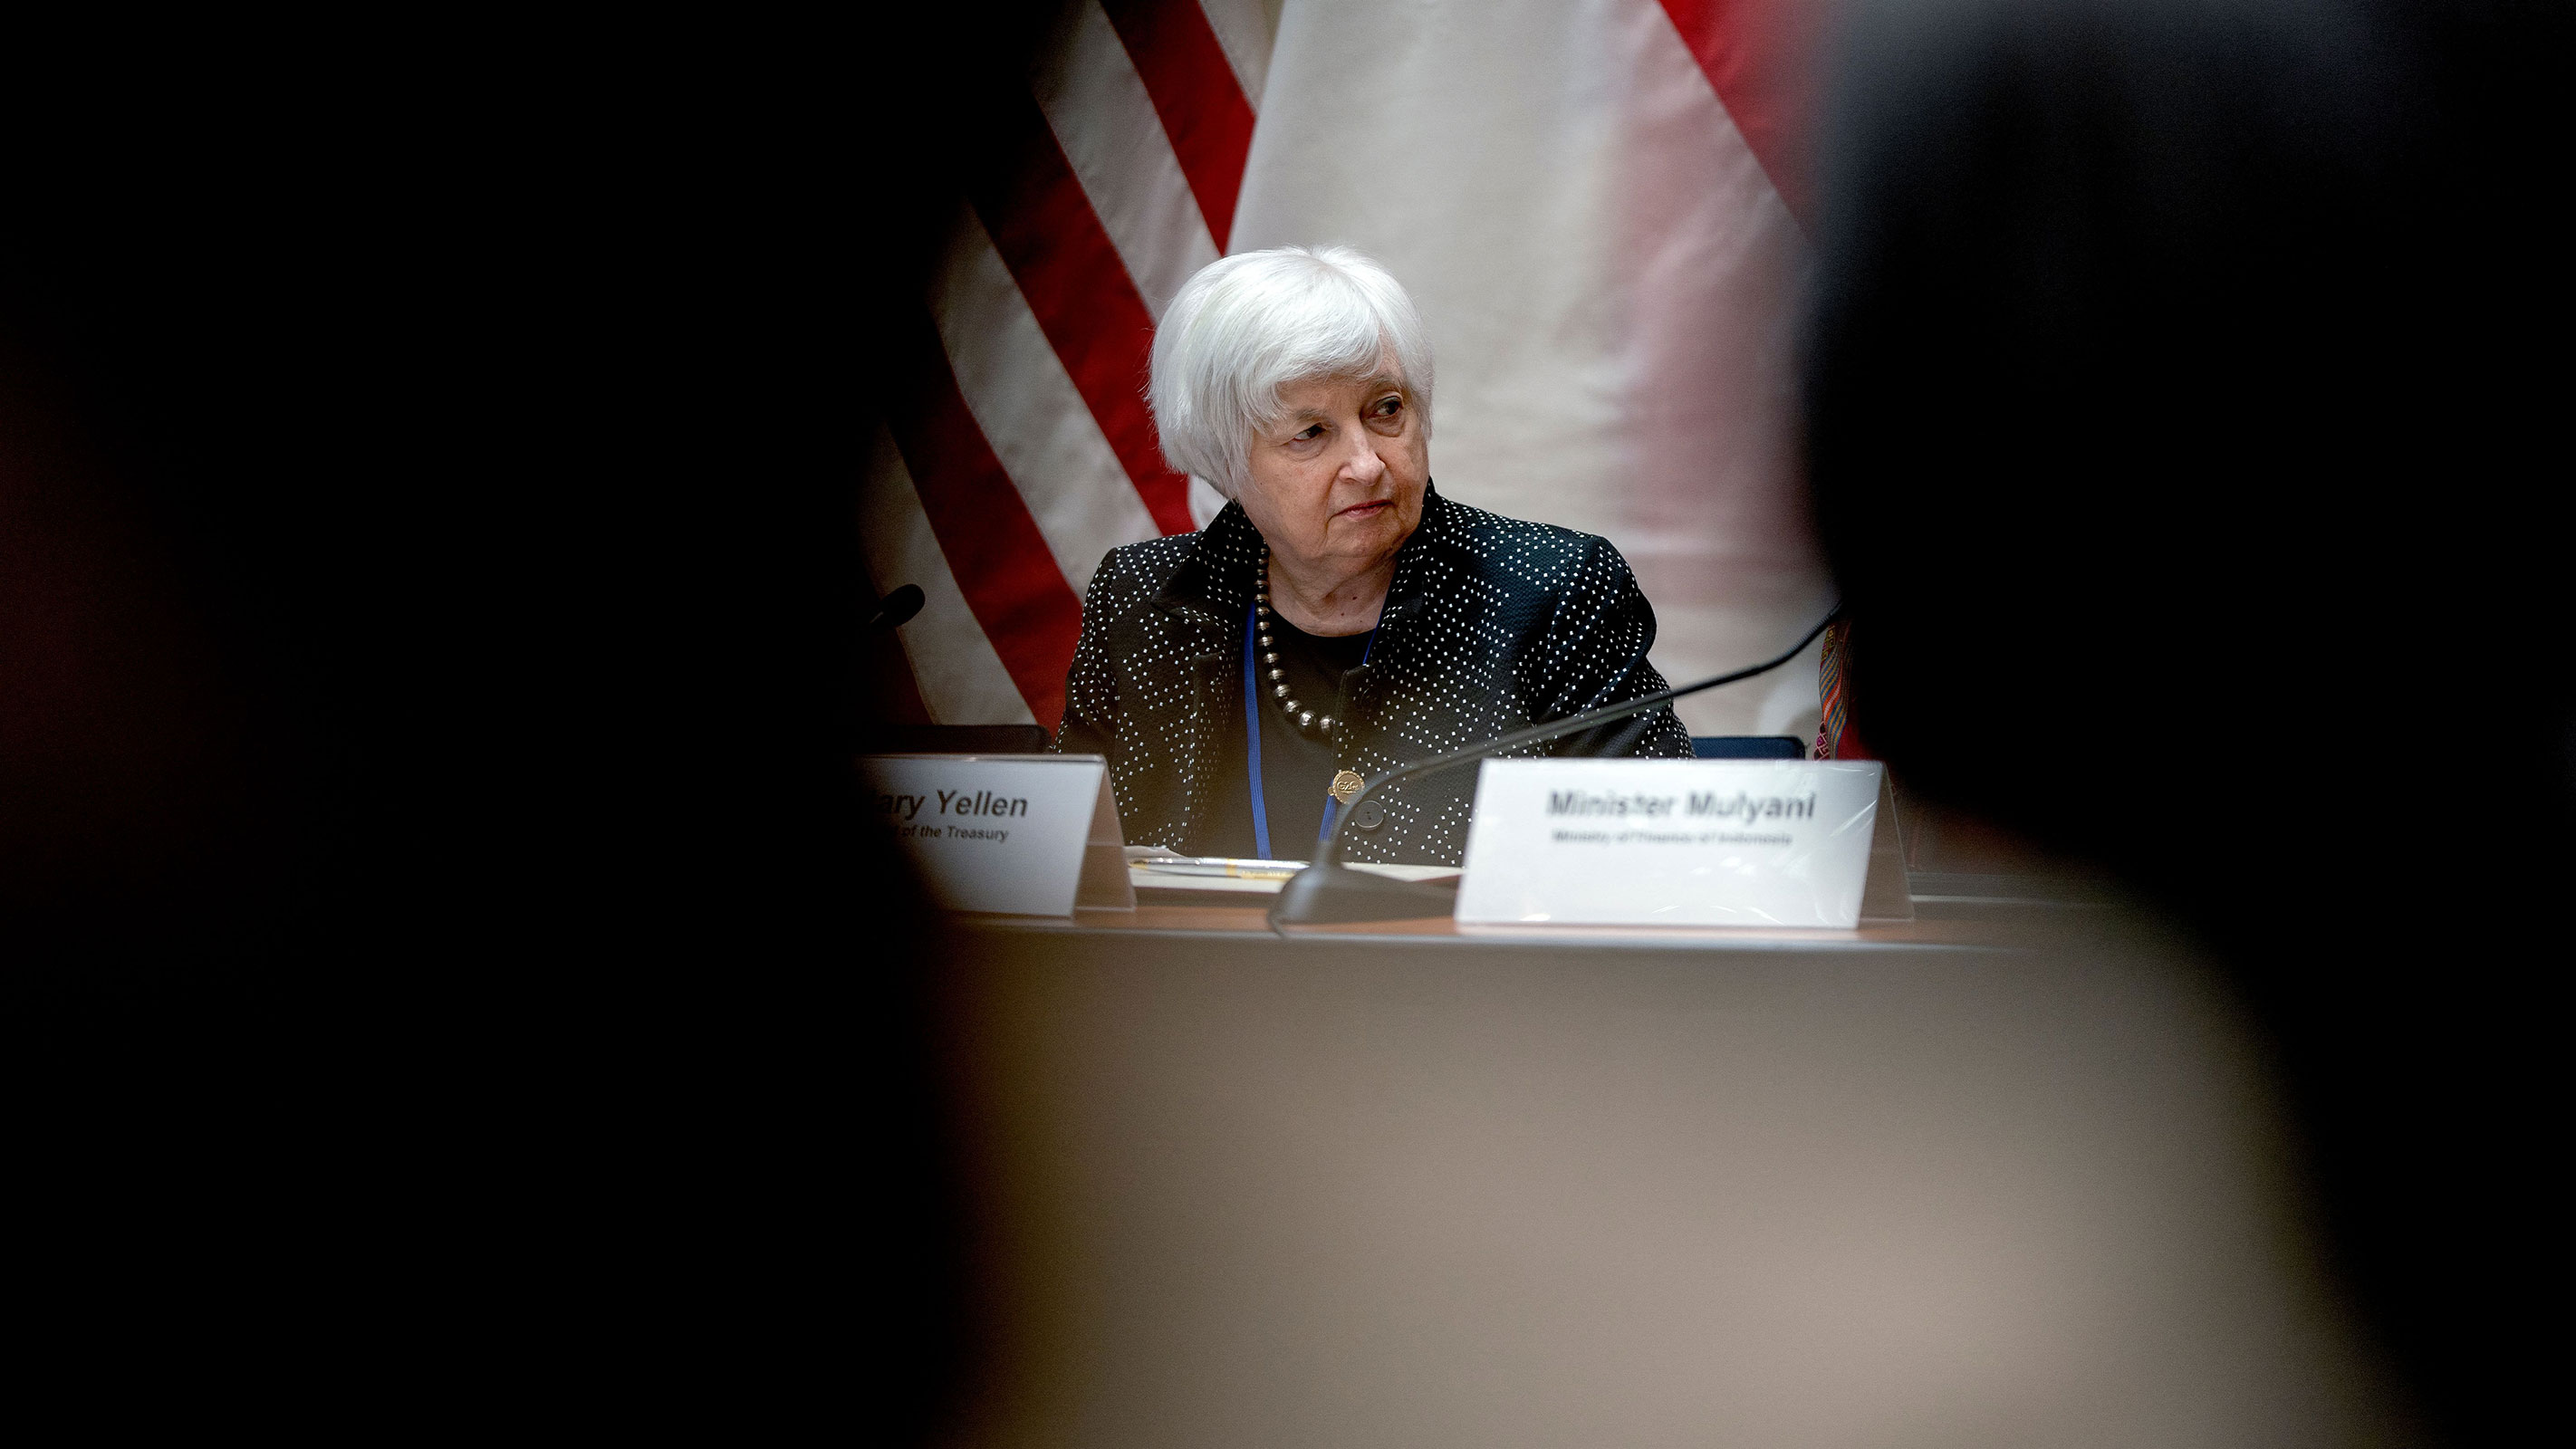 Treasury Secretary Janet Yellen listens during a signing ceremony for the Indonesia Infrastructure and Finance Compact, at the International Monetary Fund (IMF) headquarters in Washington, DC, on April 13.